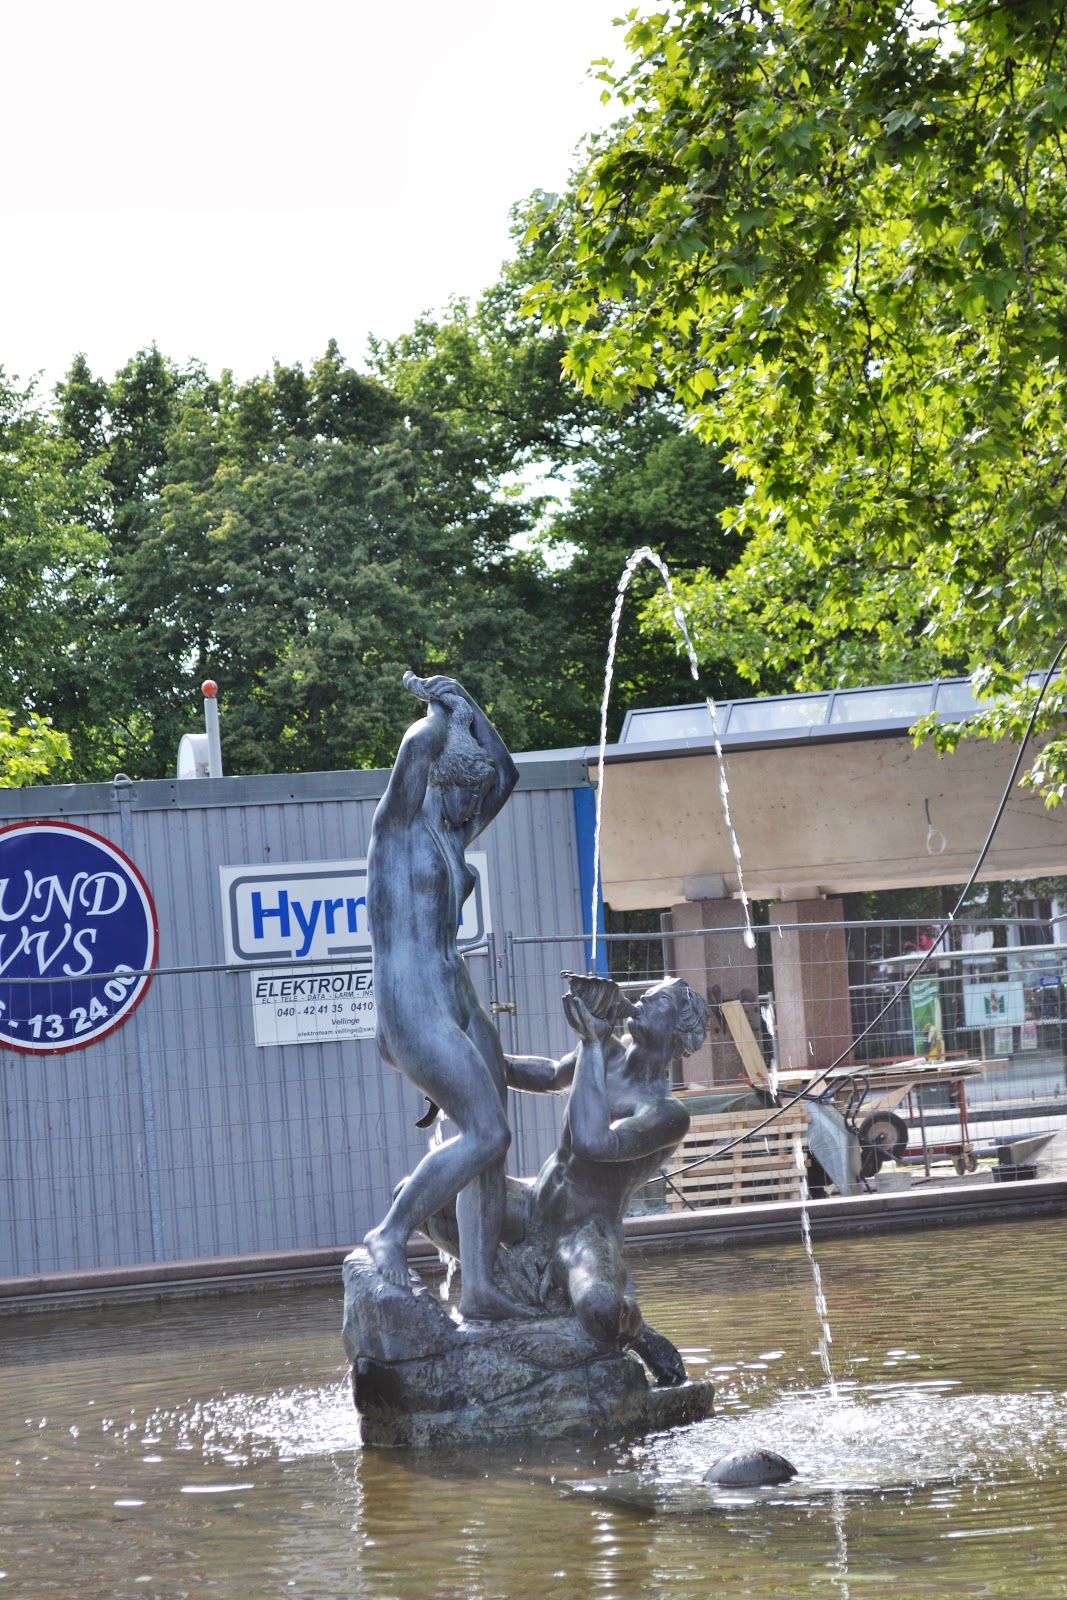 Beautiful water fountain and sculpture , malmo